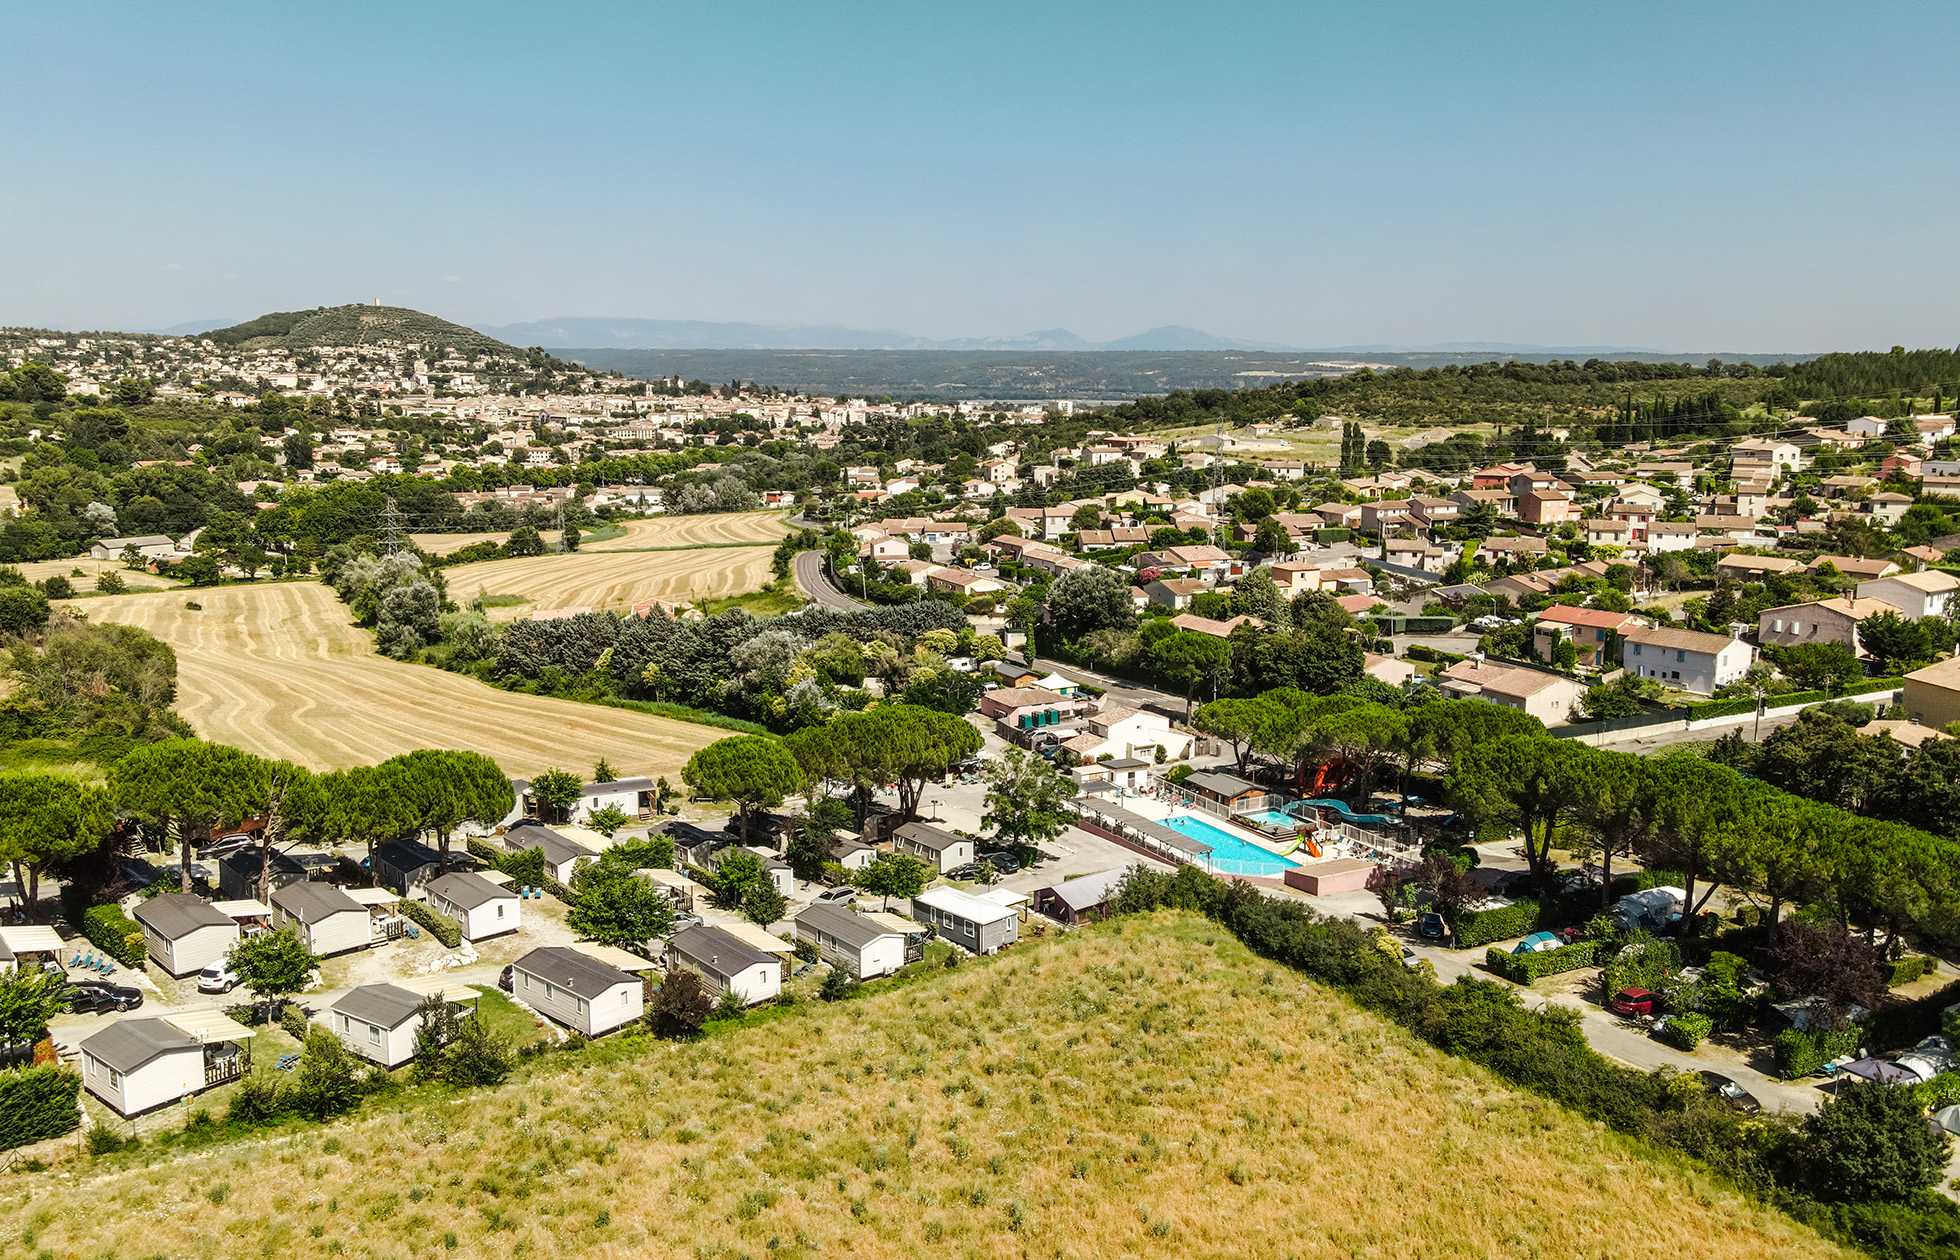 offer ' - '02 - Camping Provence Vallée - Situation